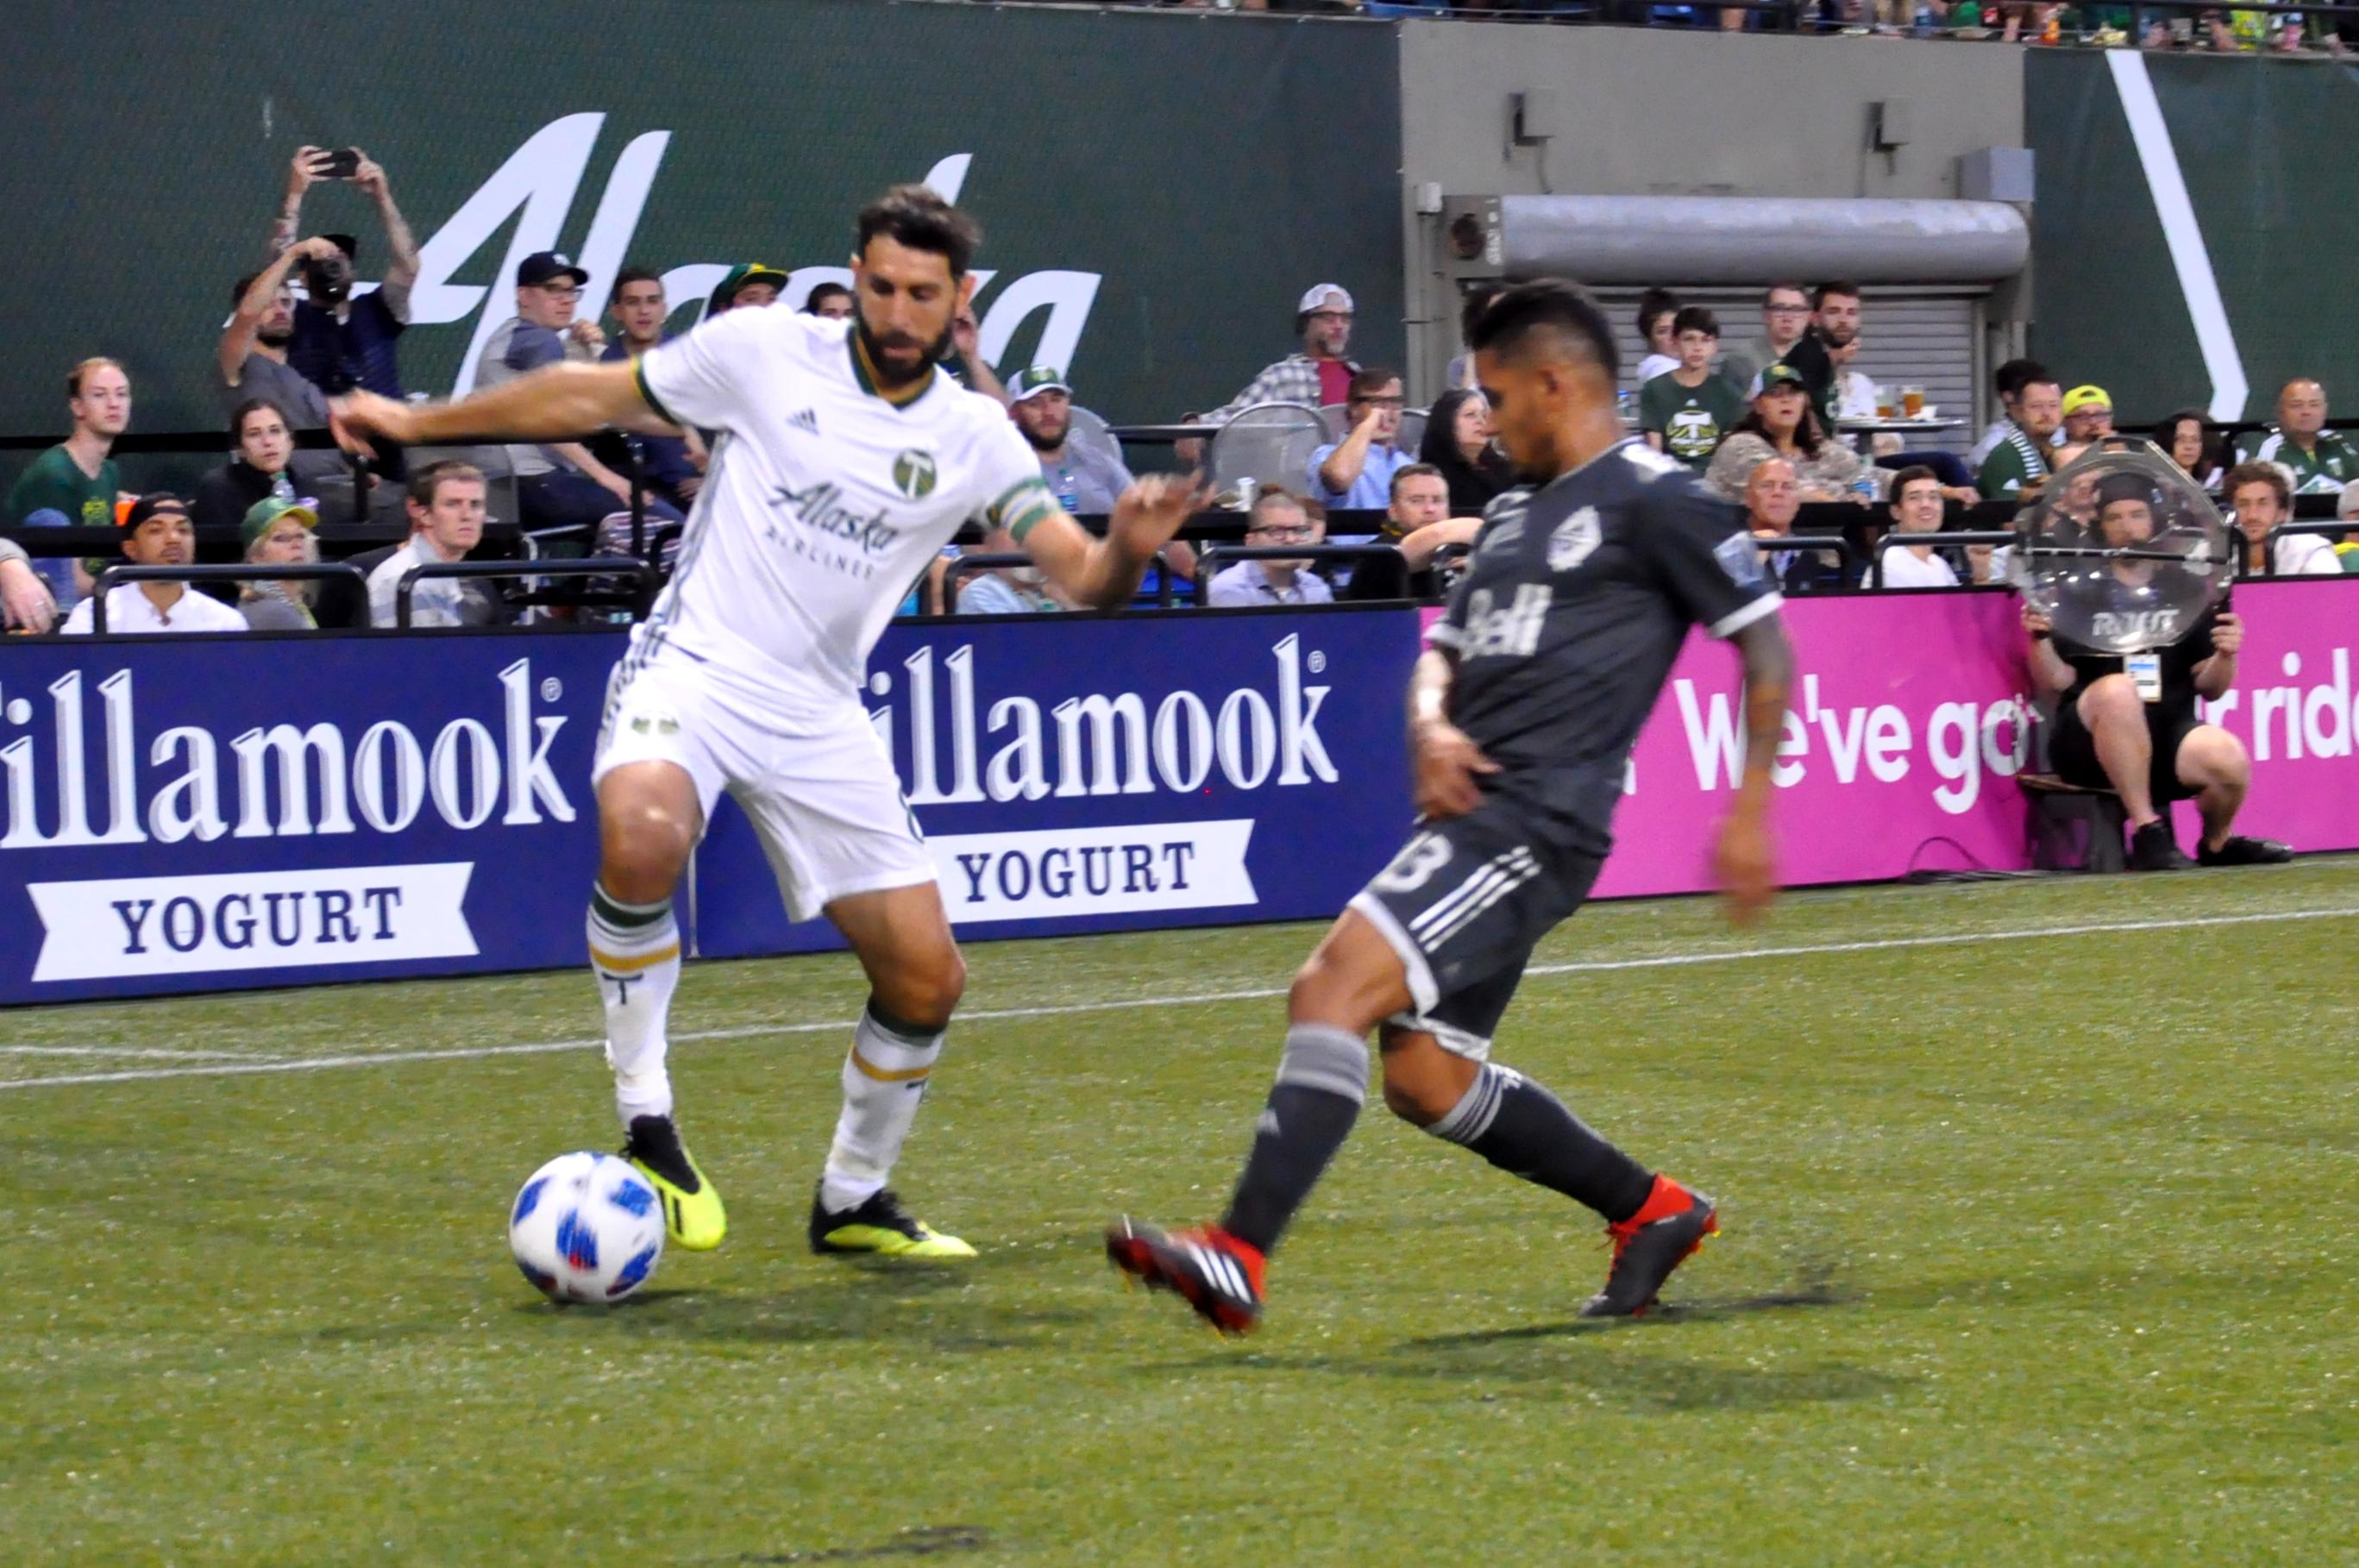 Timbers unbeaten streak ends at 15 in 2-1 loss to Whitecaps